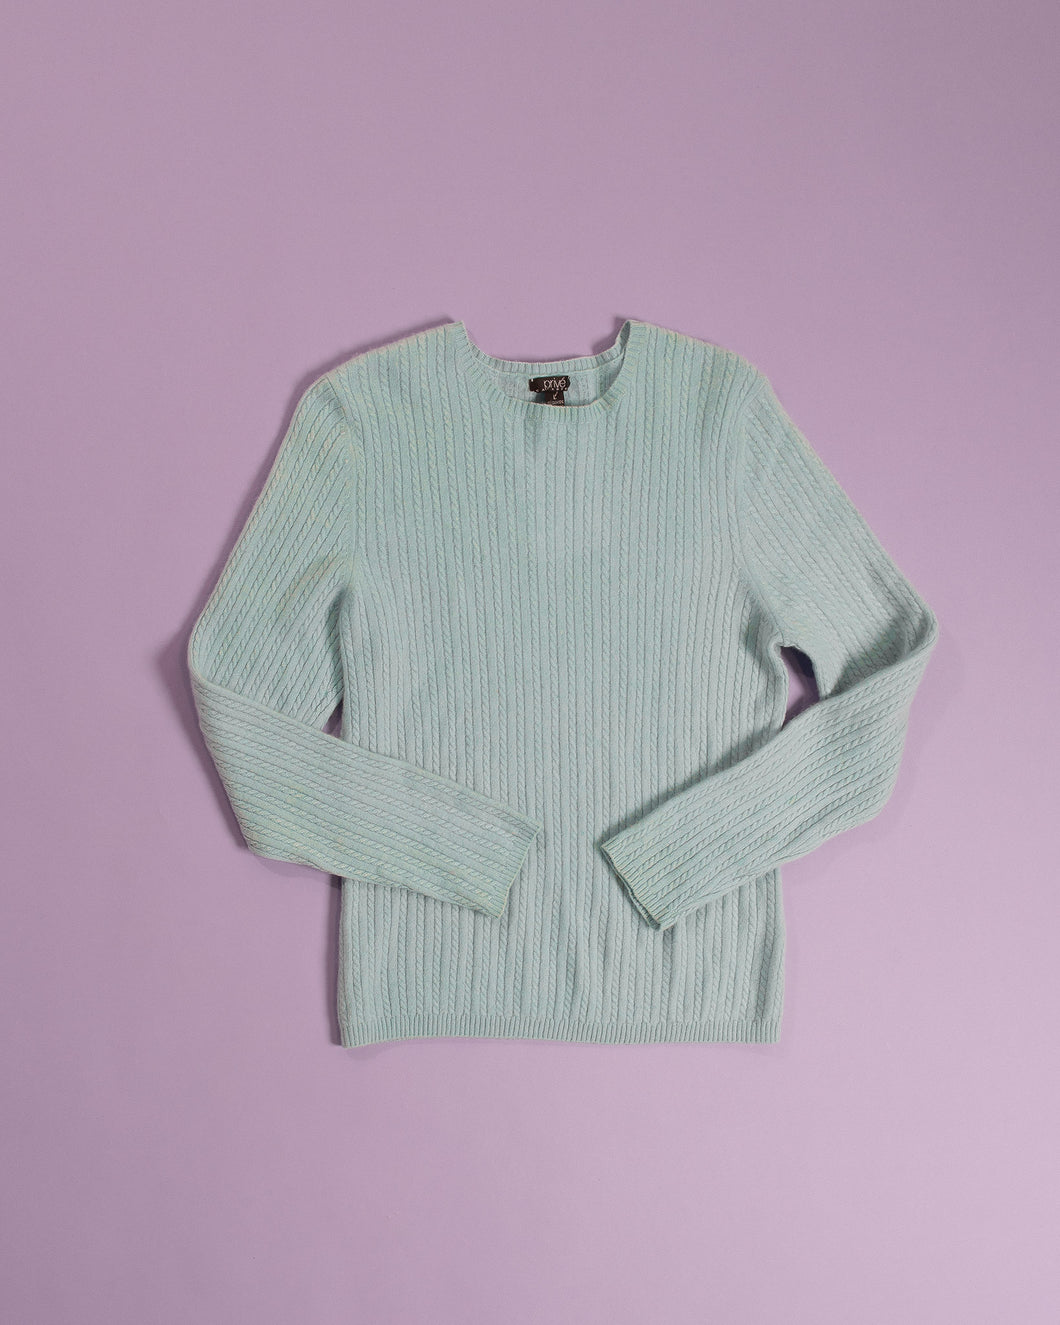 Pastel Blue Mint Cable knit Cashmere Sweater Modern Luxe Knit M-L